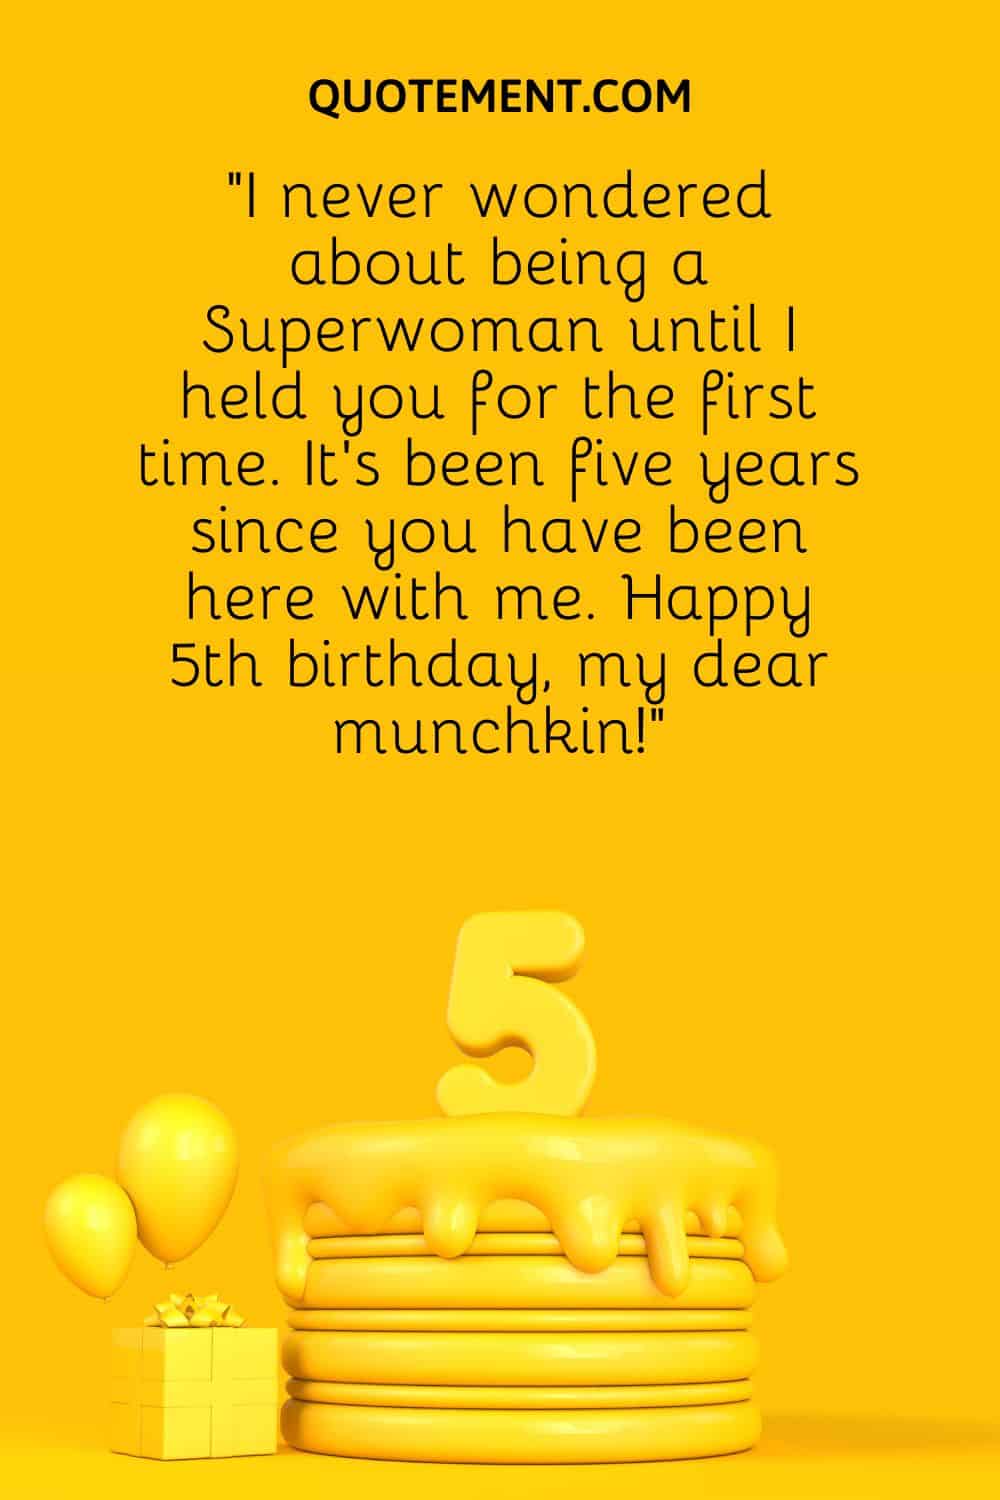 “I never wondered about being a Superwoman until I held you for the first time. It’s been five years since you have been here with me. Happy 5th birthday, my dear munchkin!”